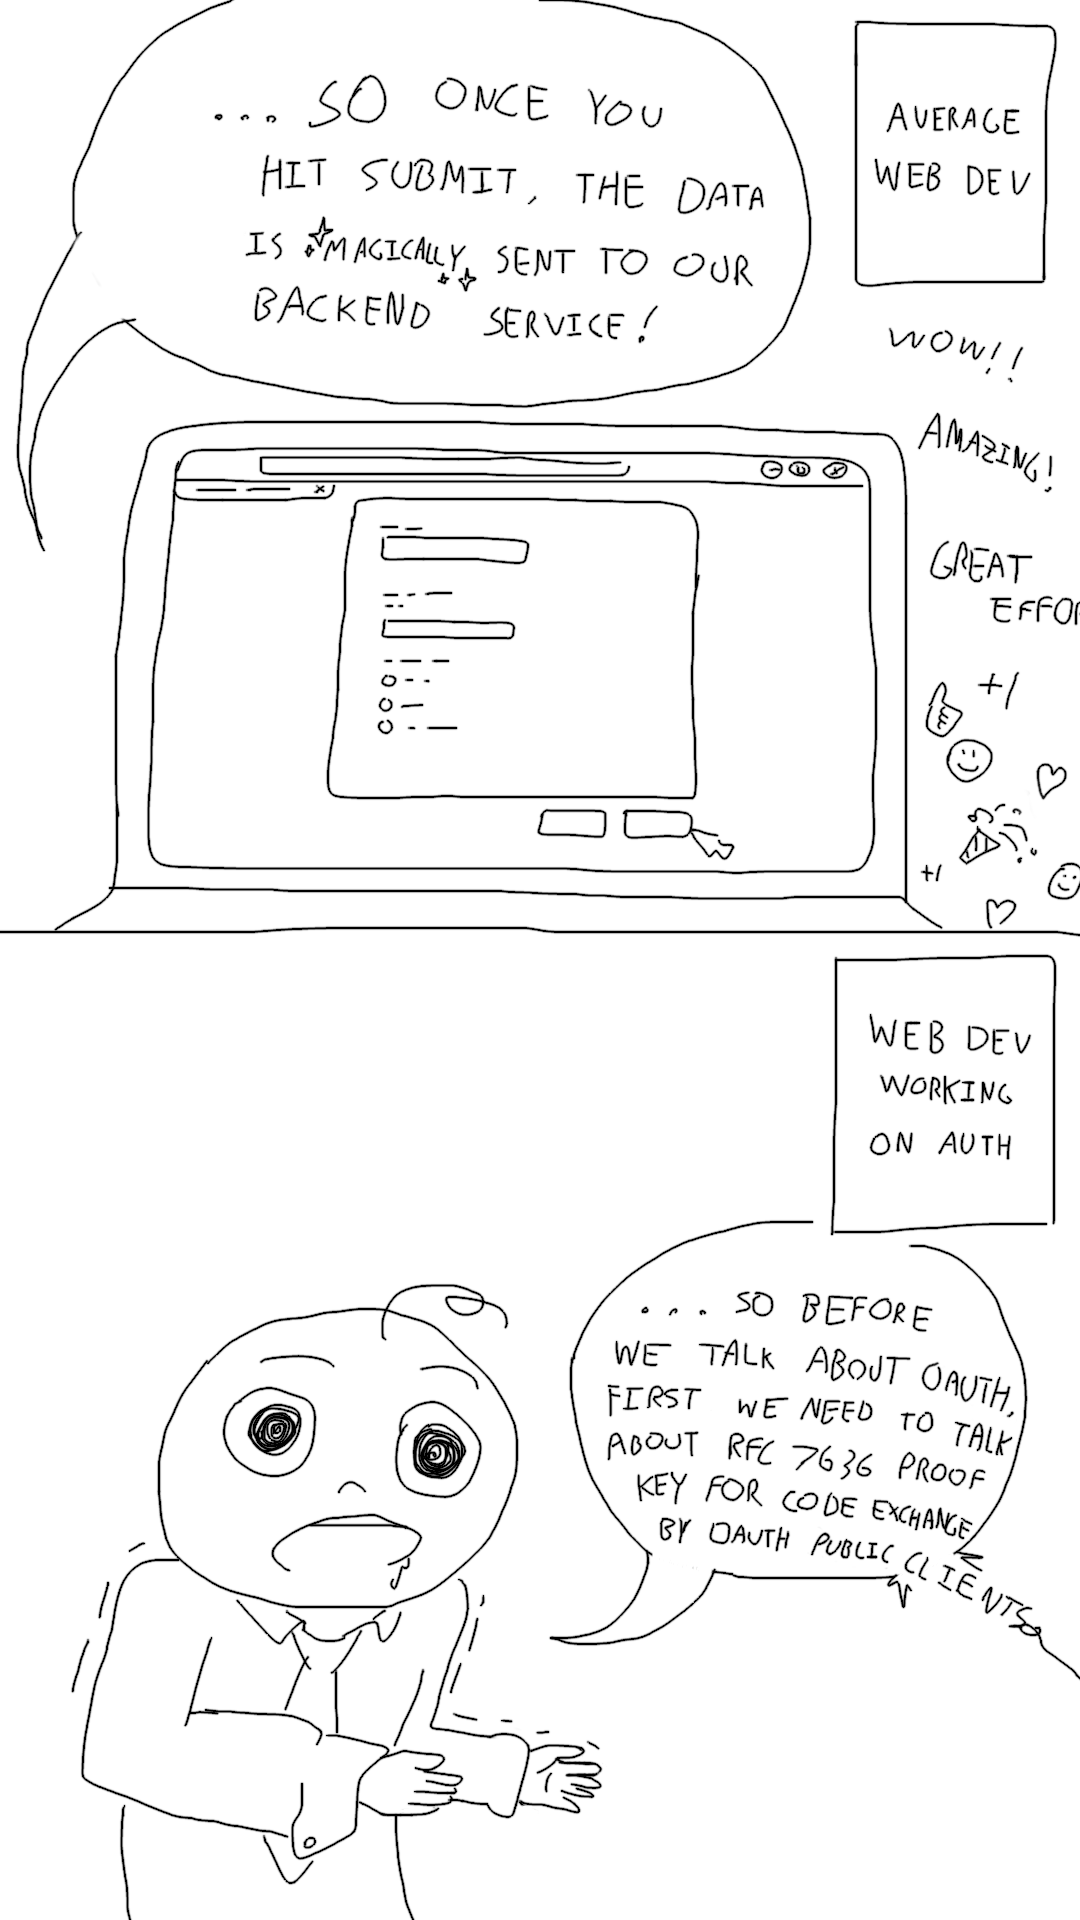 Comic constrasting the behavior of normal web developers and web developers
working on authorization. The 1st panel is a screencap of a developer saying
"...so once you hit submit the data is magically sent to our backend service!"
while demoing the app to applause. The 2nd panel is of a deranged web developer
in a polo saying, "...so before we talk about OAuth, first we need to talk about
RFC 7636 Proof Key for Code Exchange by OAuth Public
Clients".